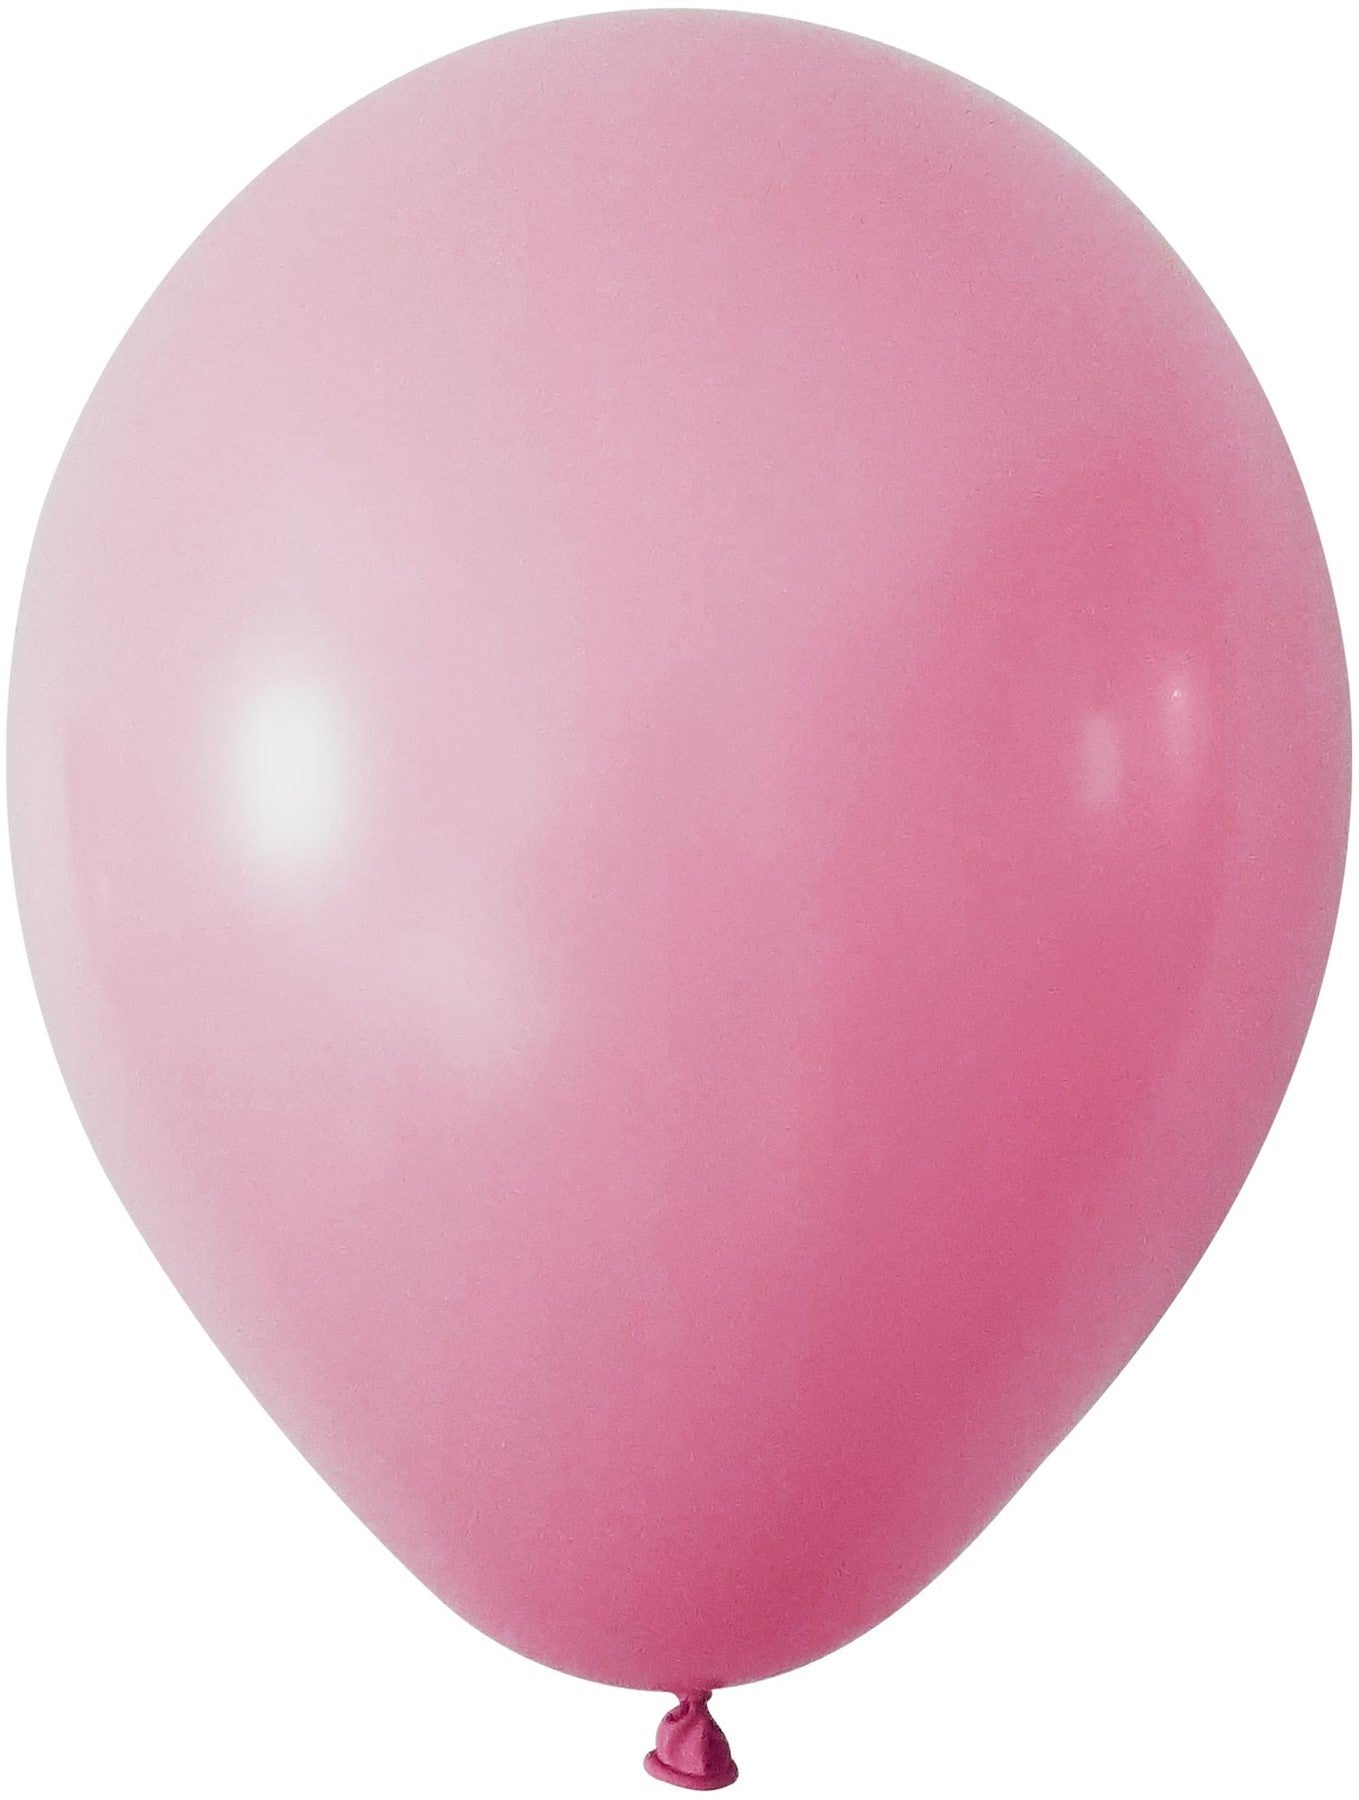 View Pink Latex Balloon 12 inch Pk 100 information